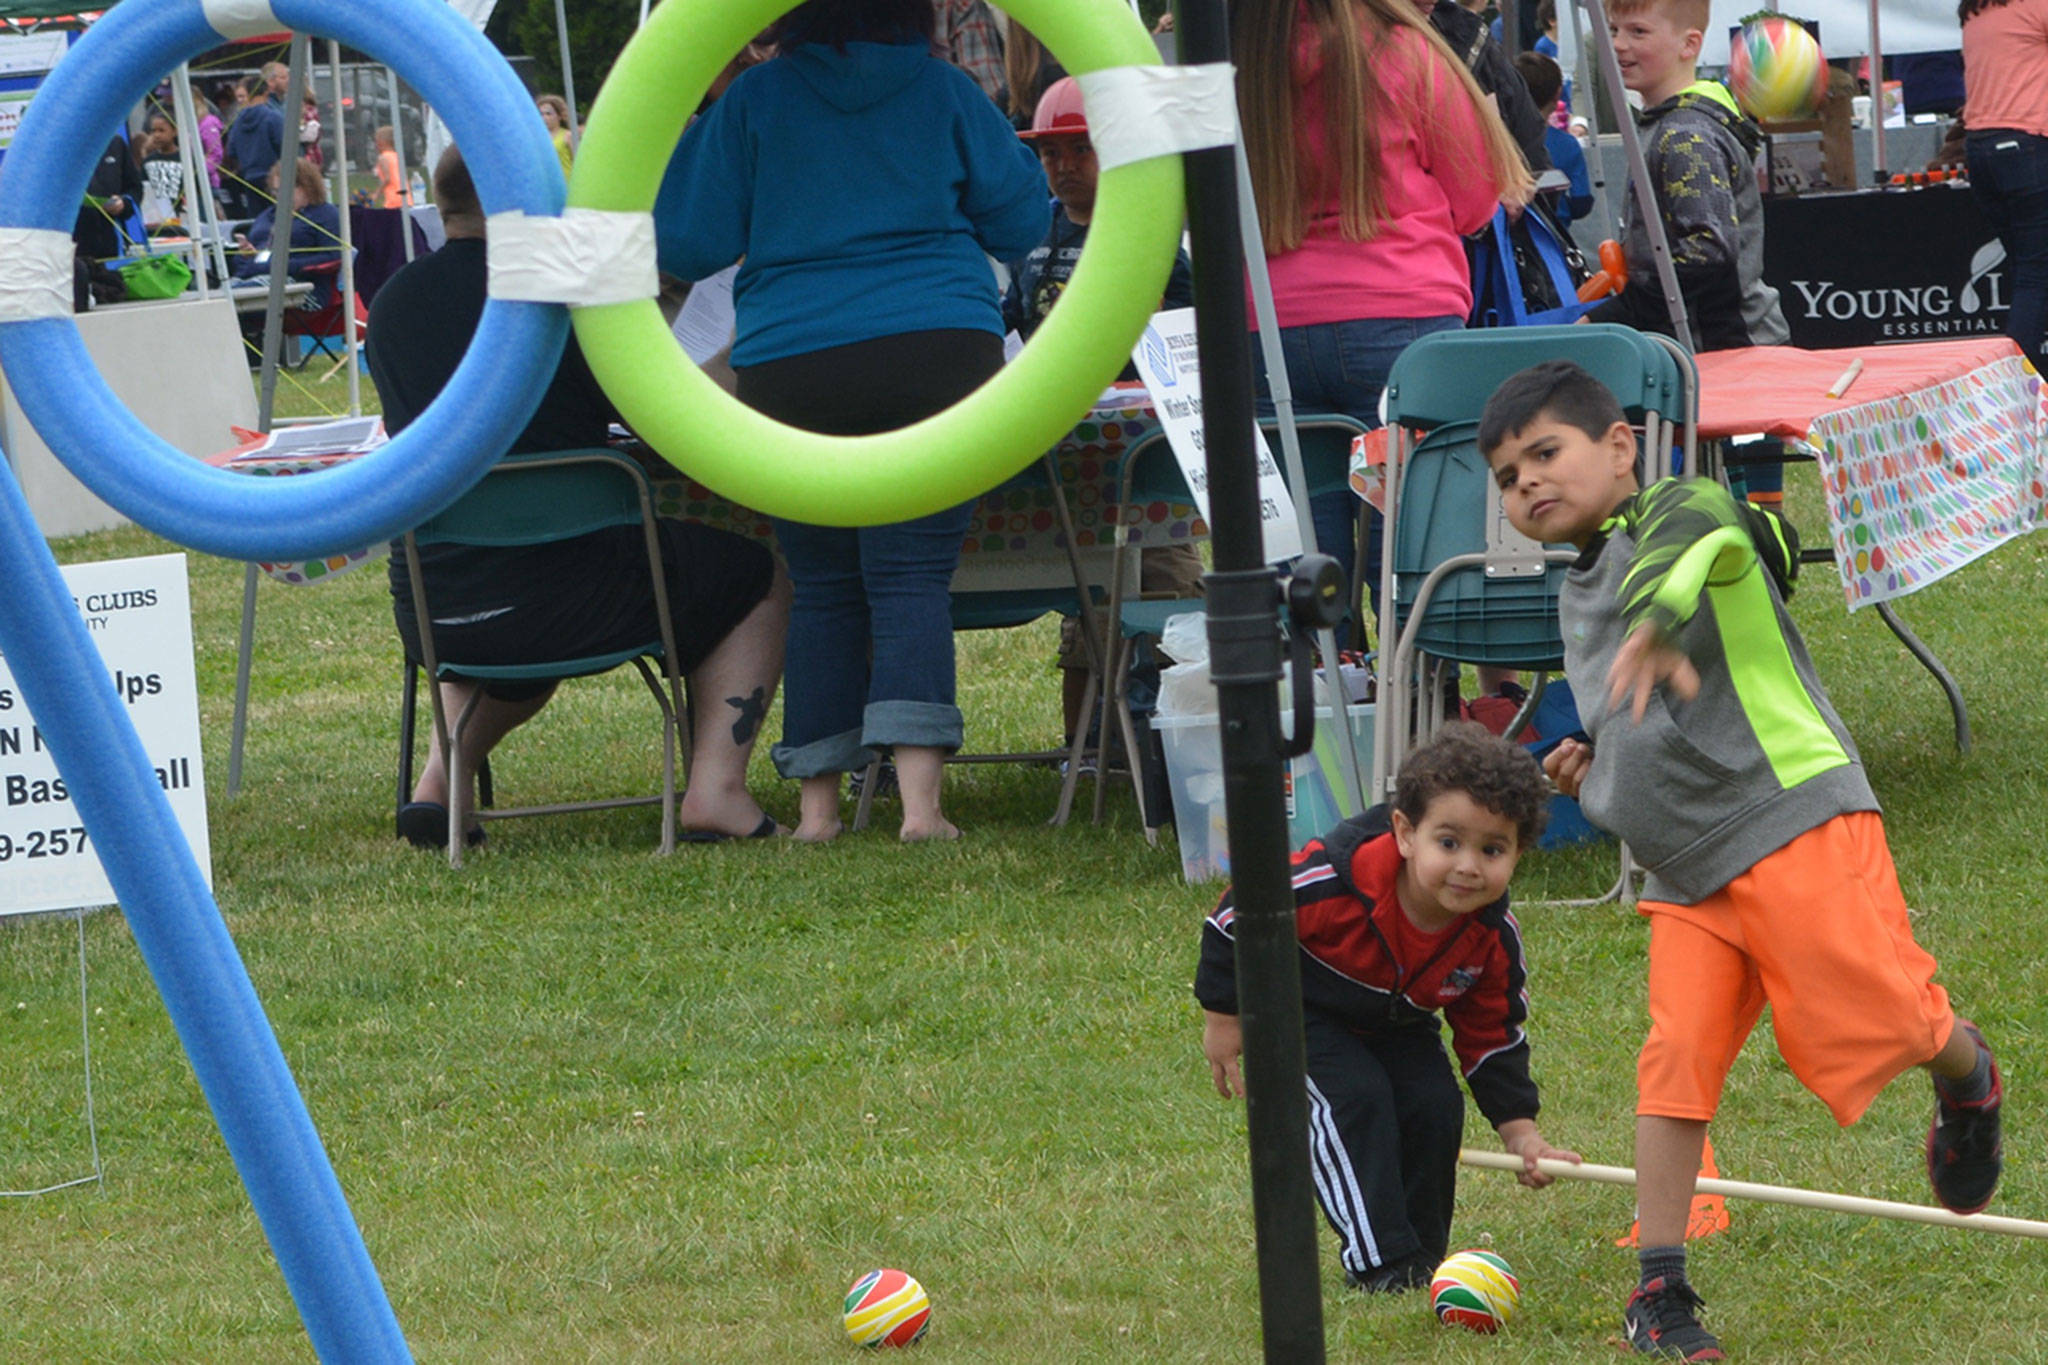 Fun for all at Healthy Communities Day (slide show)